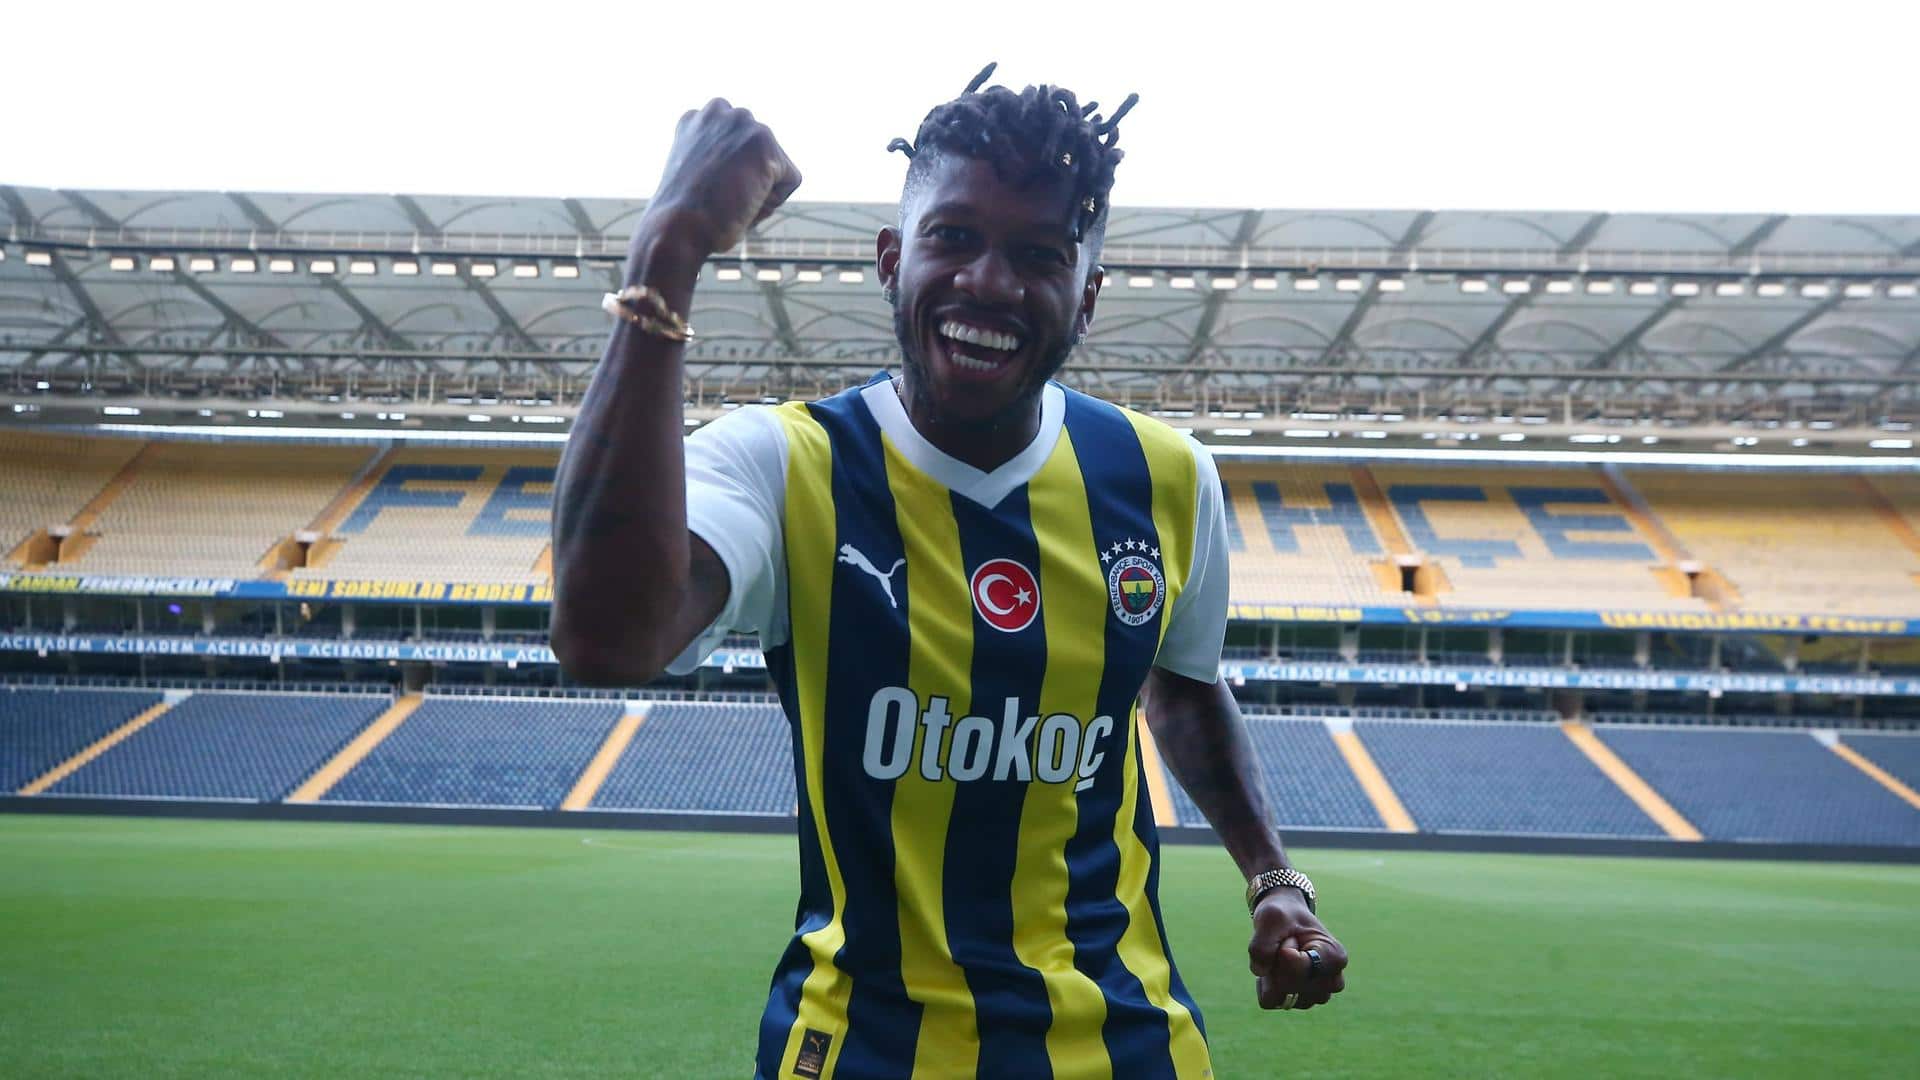 Fred joins Fenerbahce from Manchester United for £12.9m: Key stats